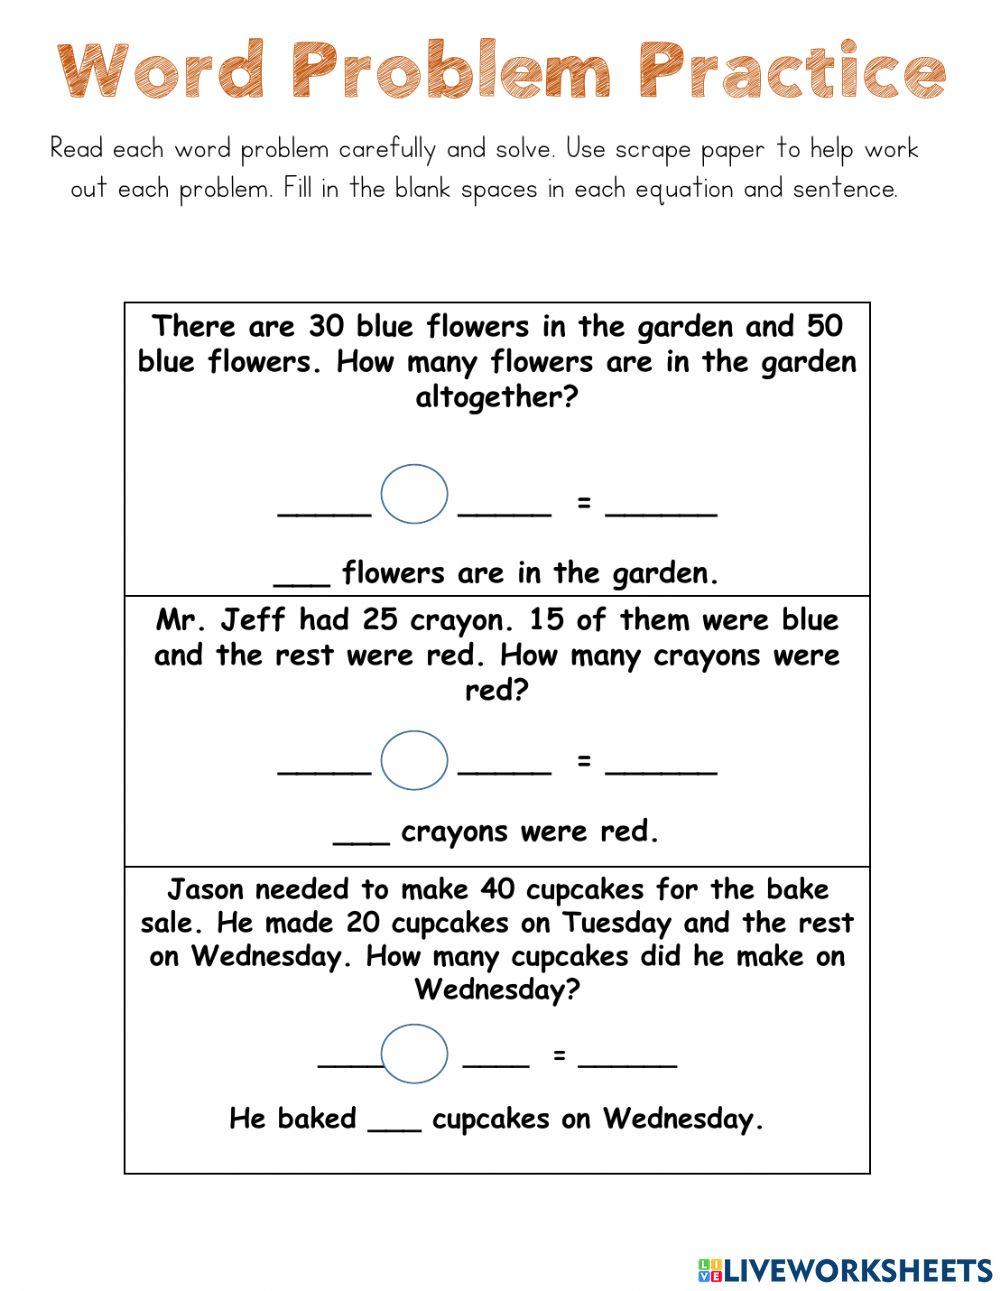 Word Problems 1